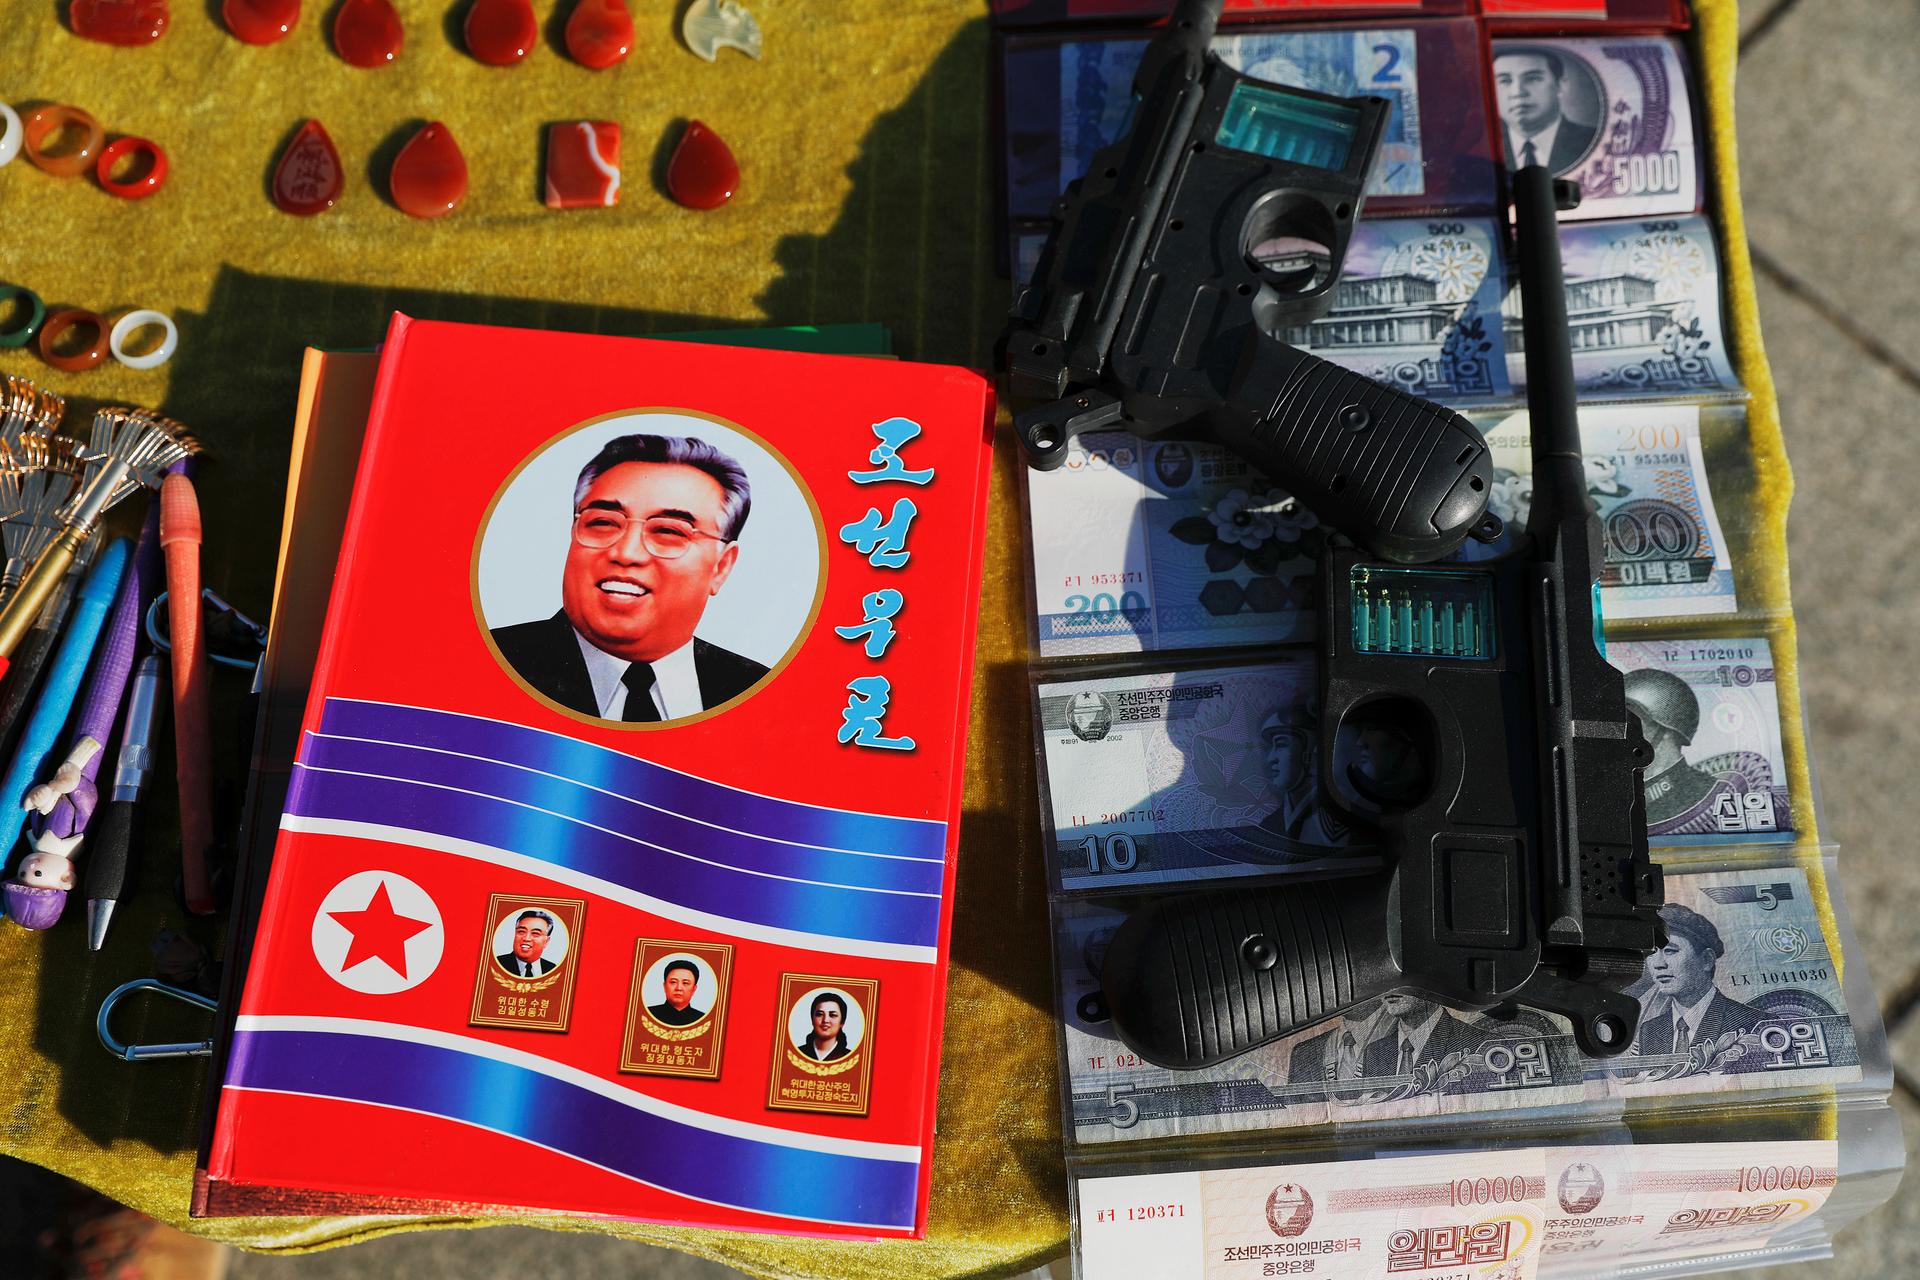 North Korean souvenirs are displayed for sale on the banks of the Yalu River in Dandong in Liaoning province, China.